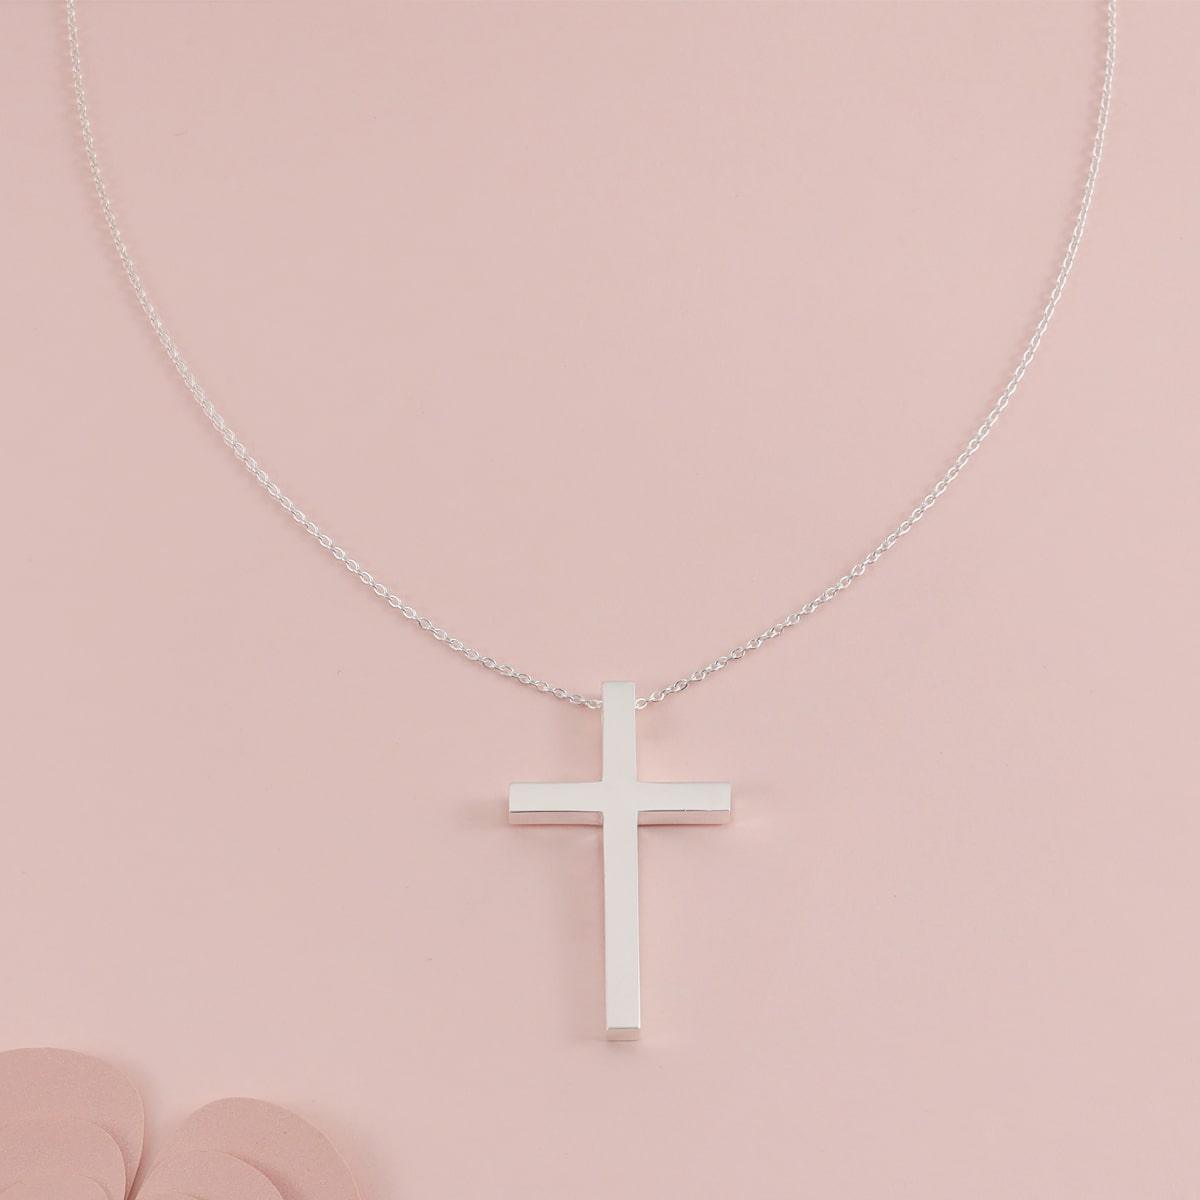 herzschmuck Engraved Necklaces Personalized Side-Engraved Cross Necklace